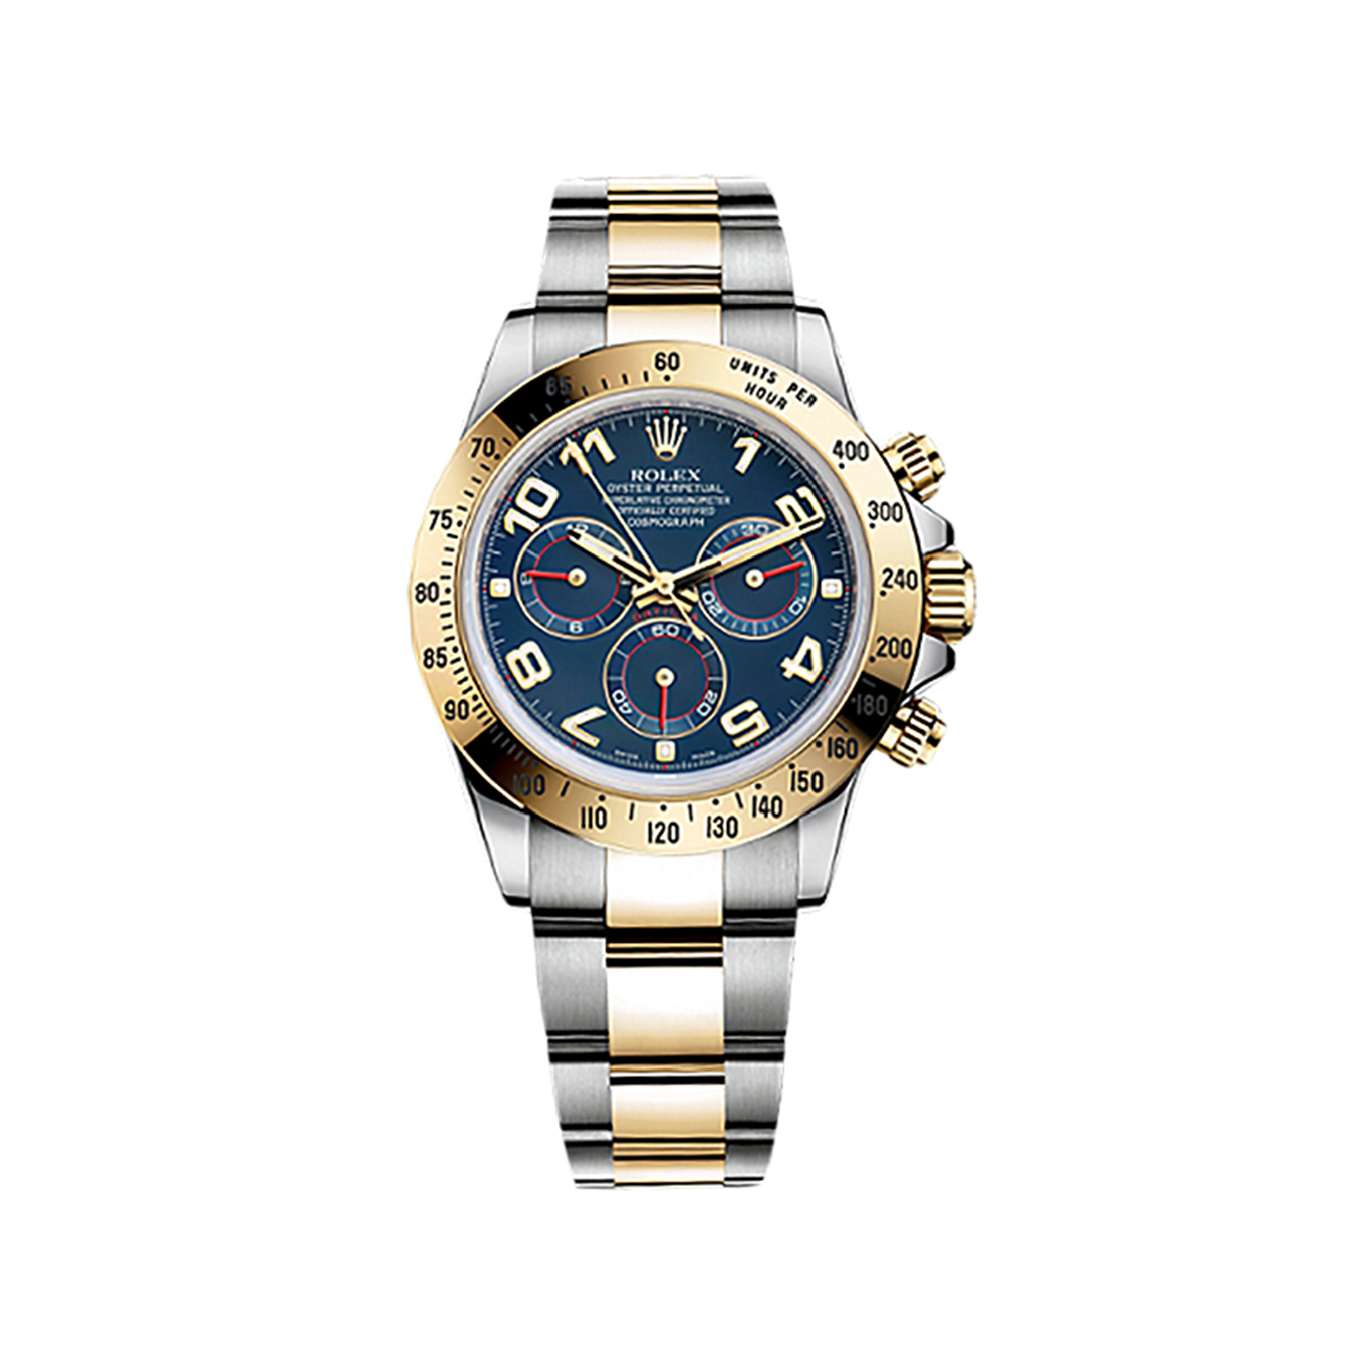 Cosmograph Daytona 116523 Gold & Stainless Steel Watch (Blue)